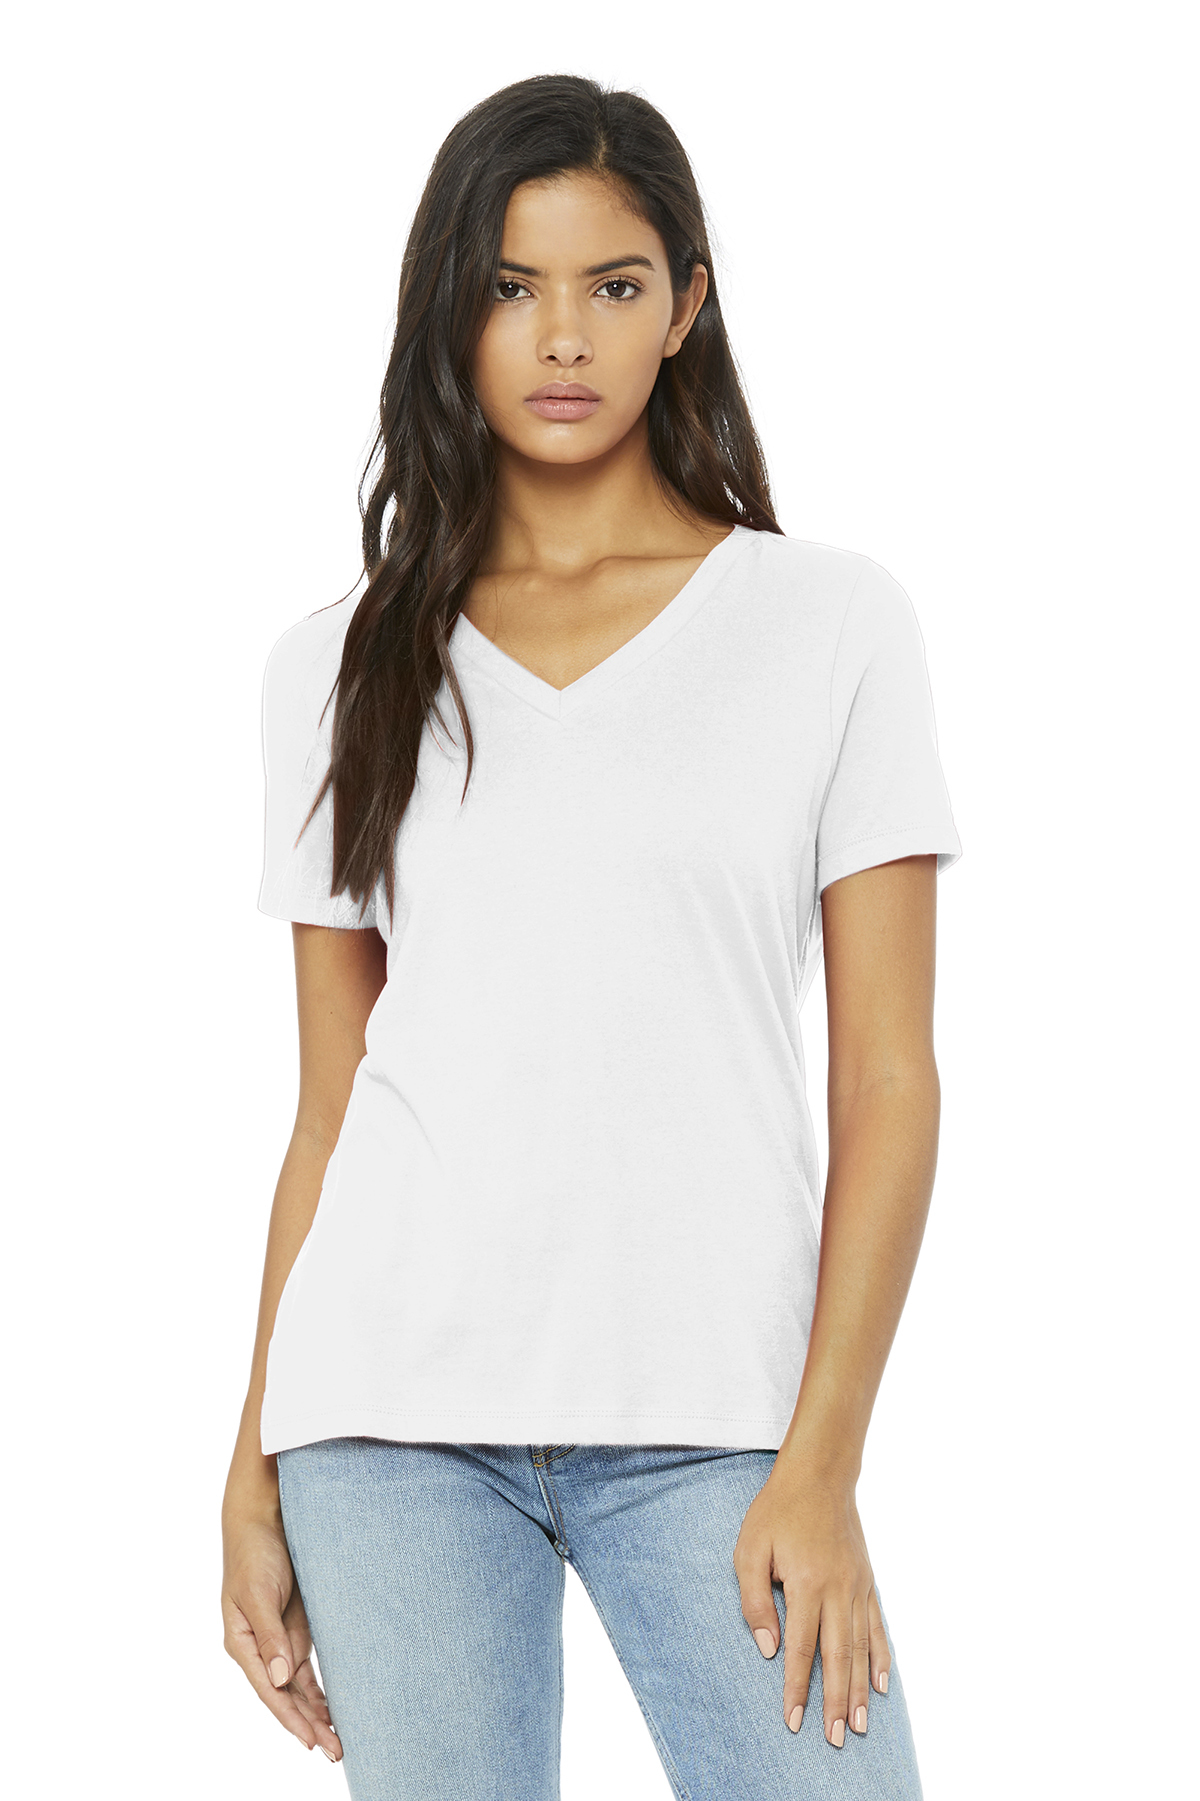 BELLA+CANVAS ® Women’s Relaxed Jersey Short Sleeve V-Neck Tee | T ...